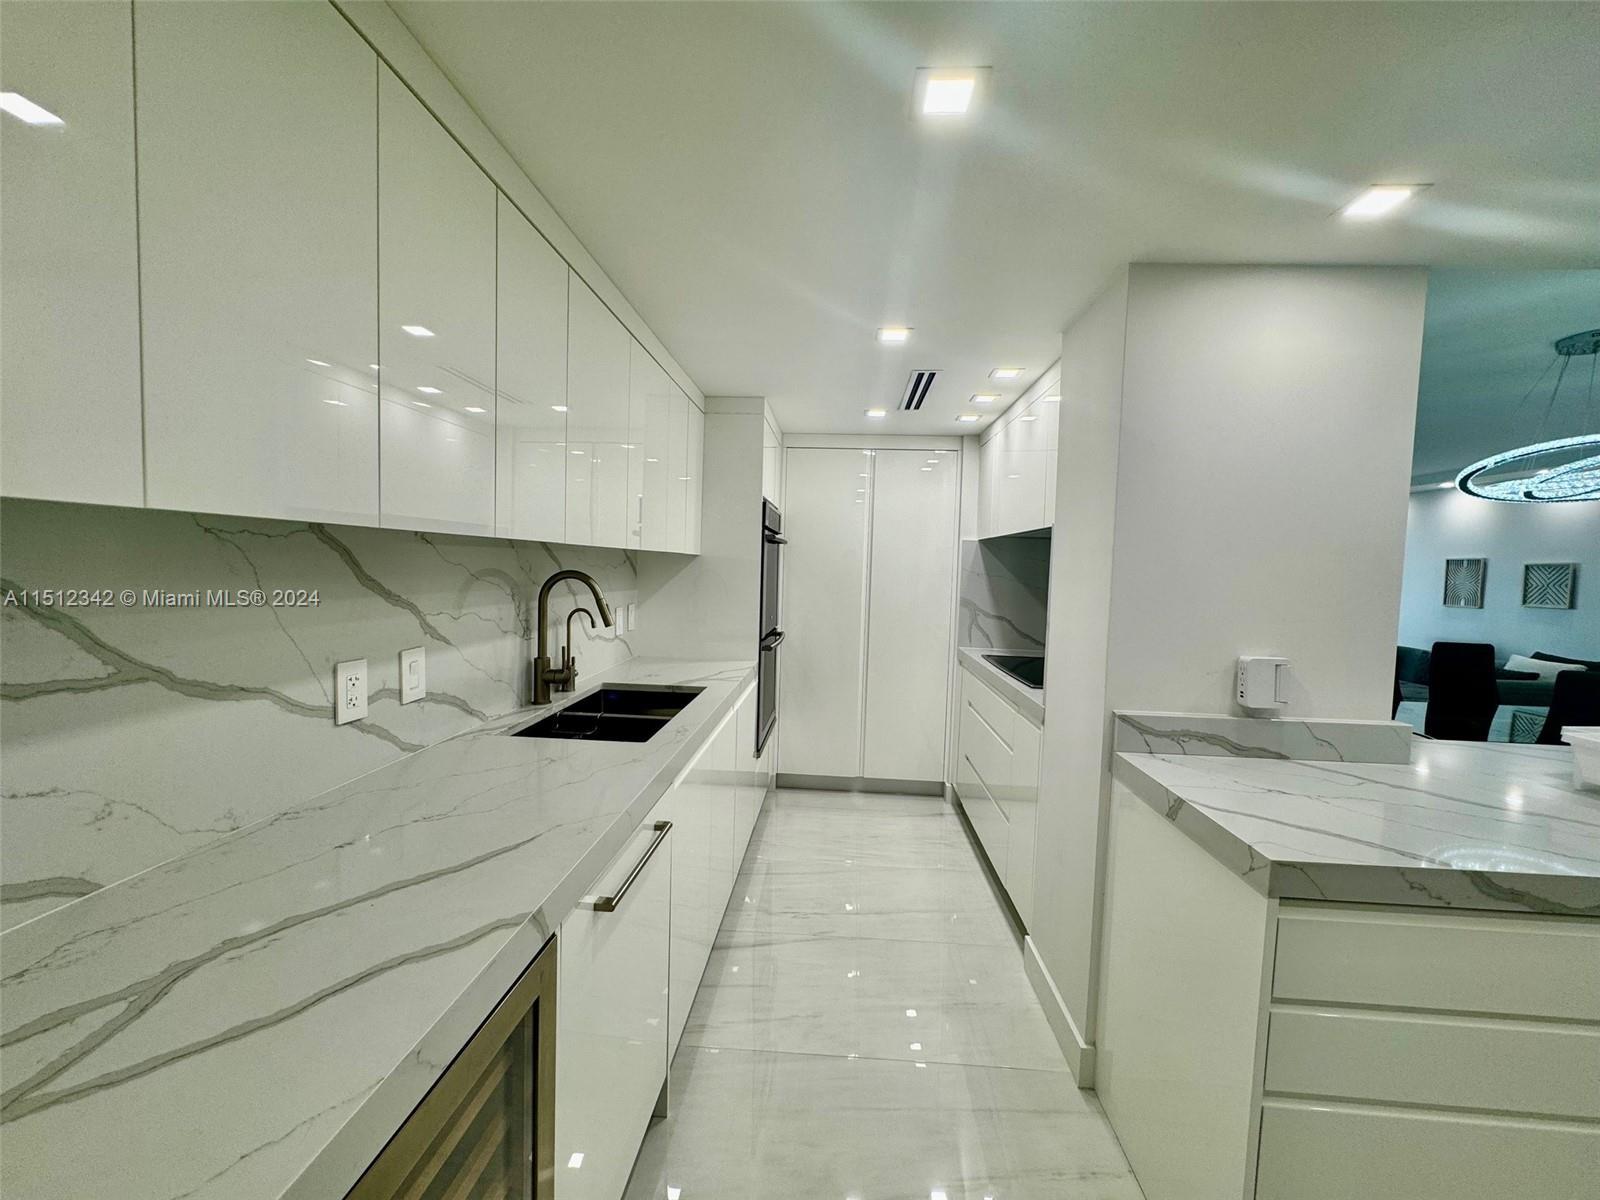 Totally Renovated & sophisticated 3 bed 3&half bath. Furnished, modern open floorpan w large kitchen